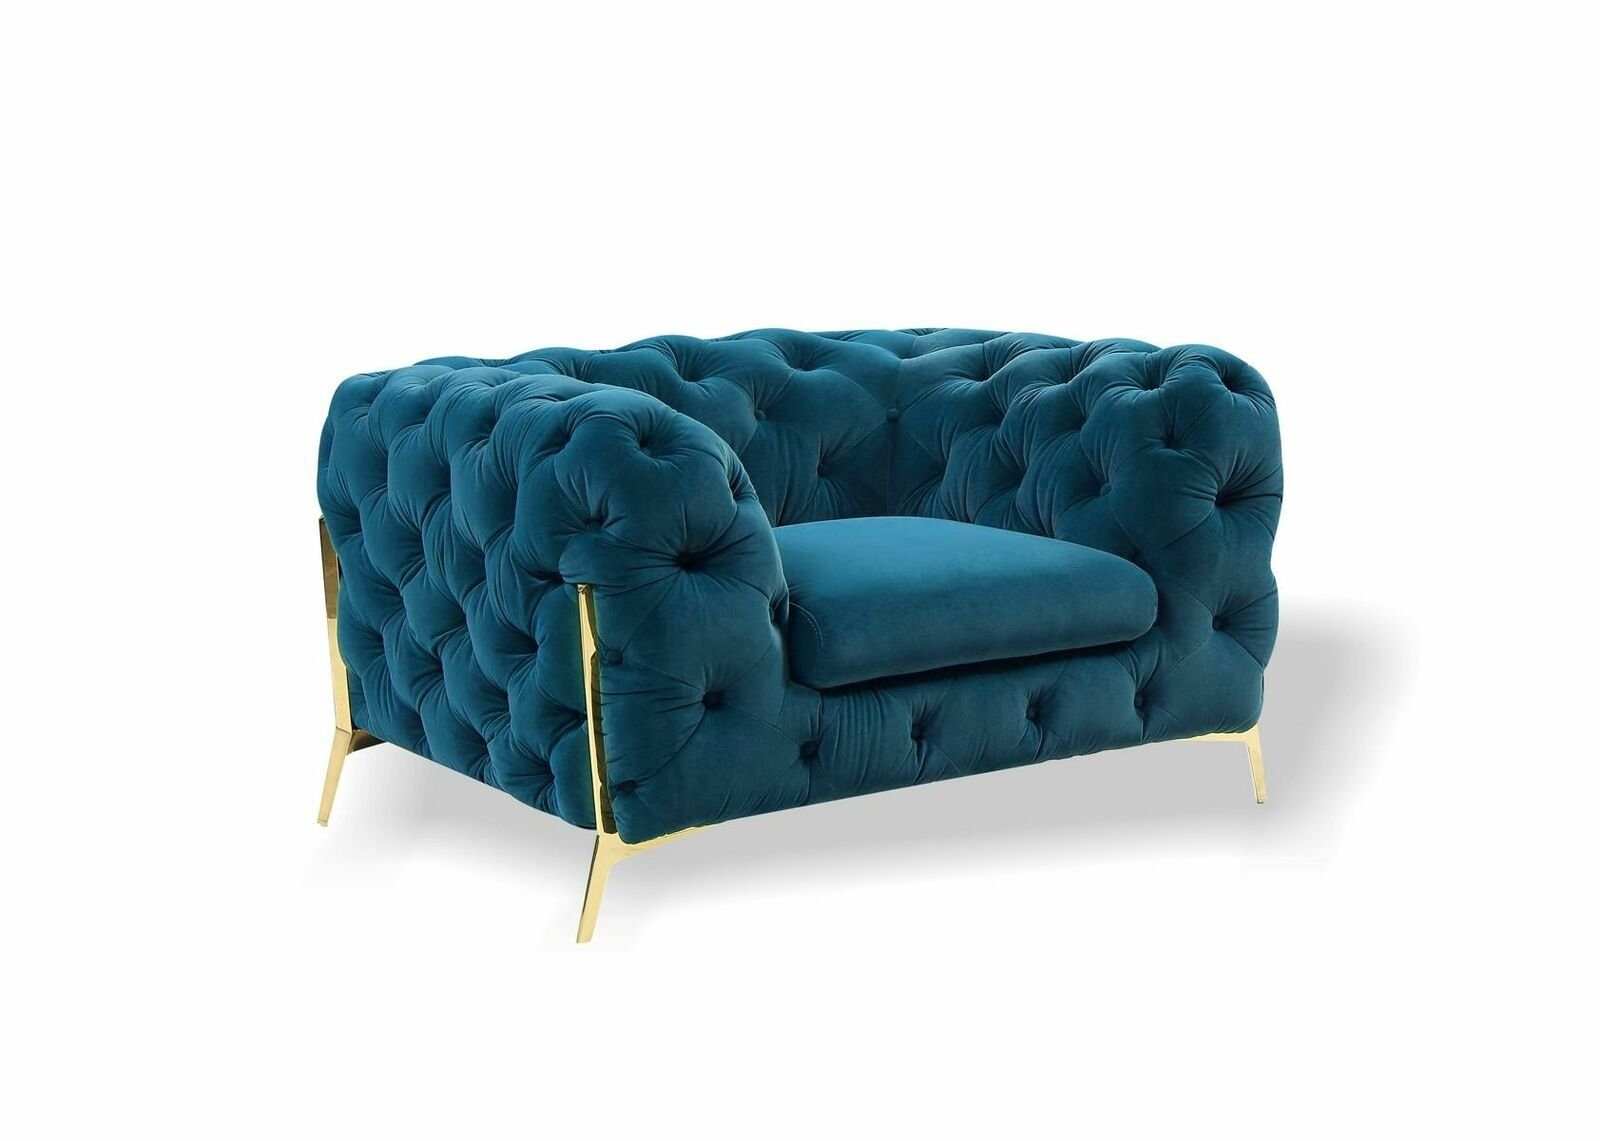 Couch Couch in Sitzer Chesterfield 1 Ohrensessel (Sessel), JVmoebel Made Sofa Blau Polster Sessel Ohrensessel Europe